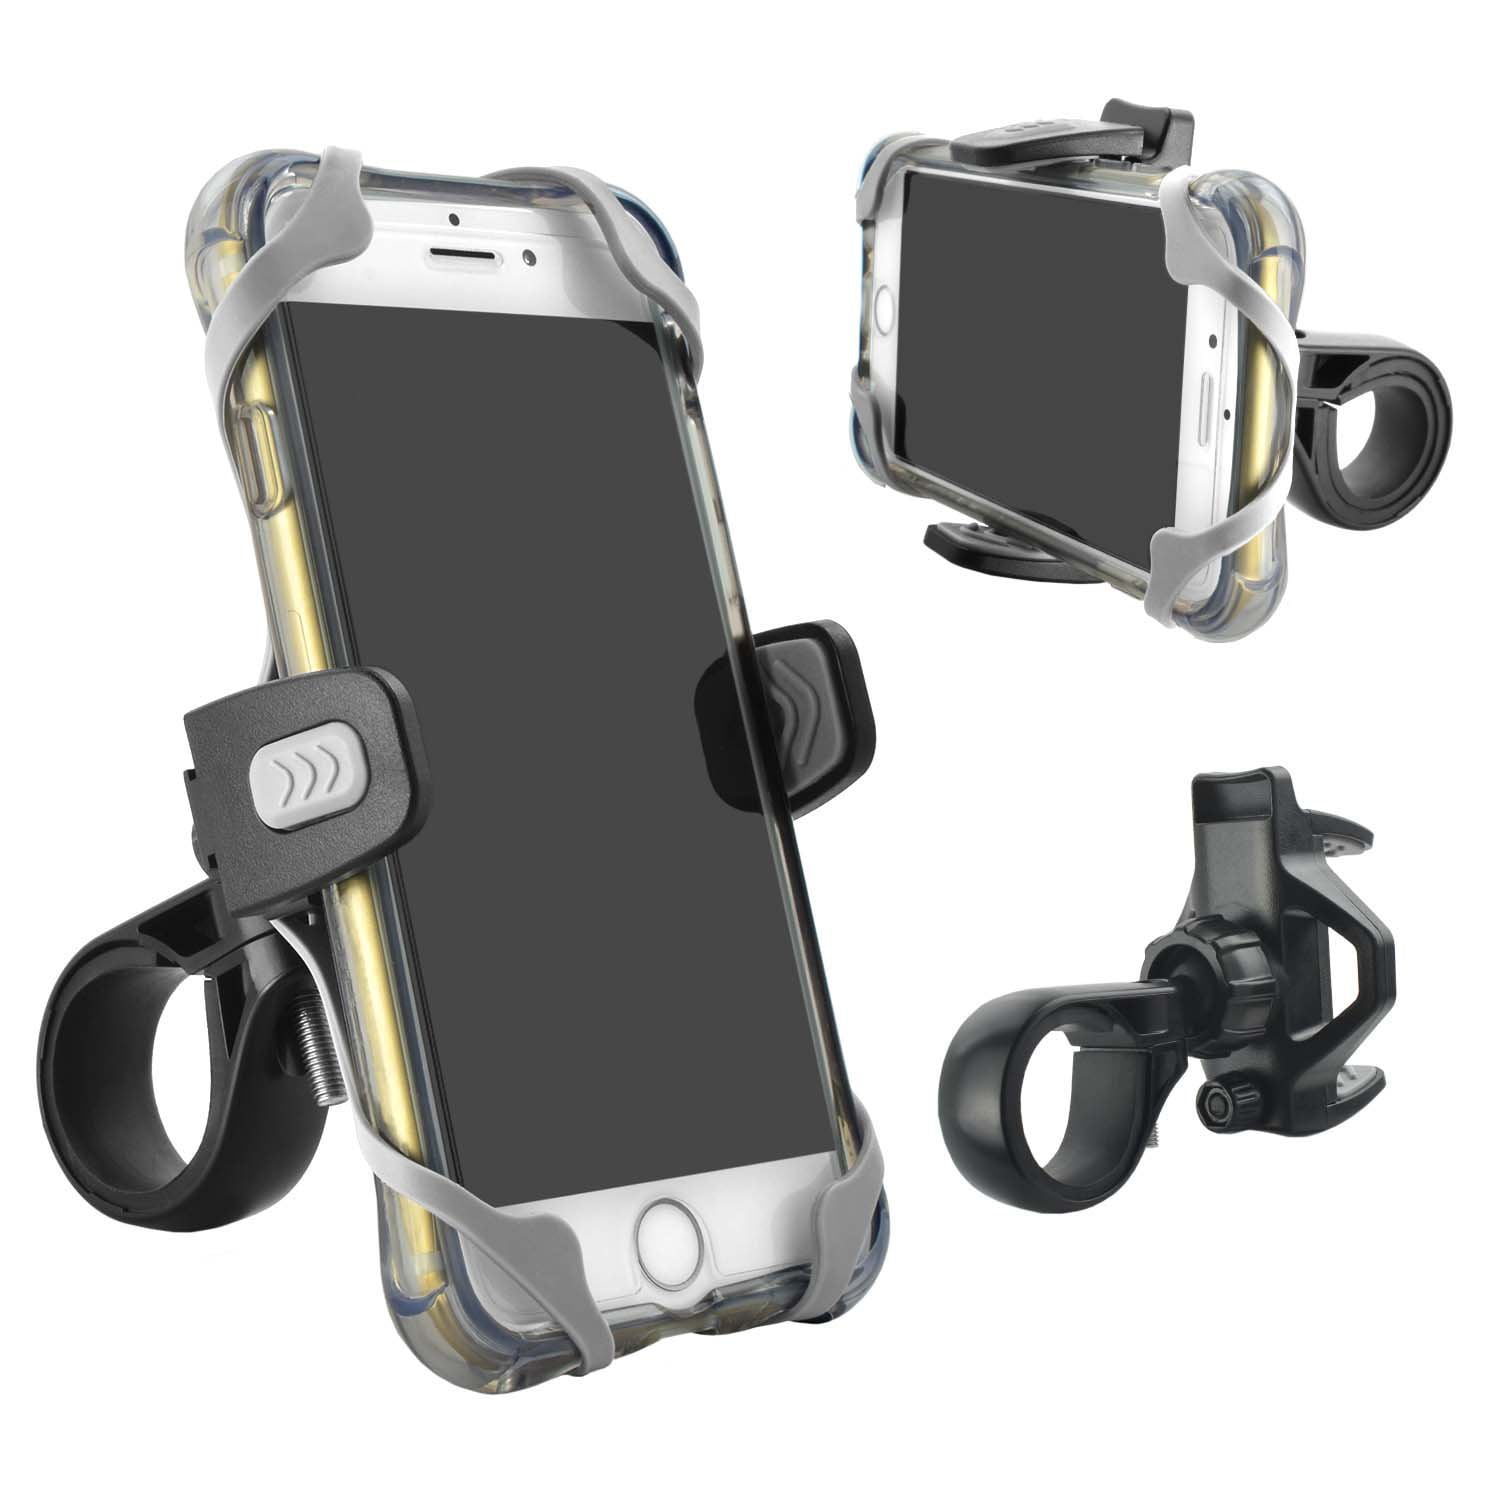 phone holder for your bike